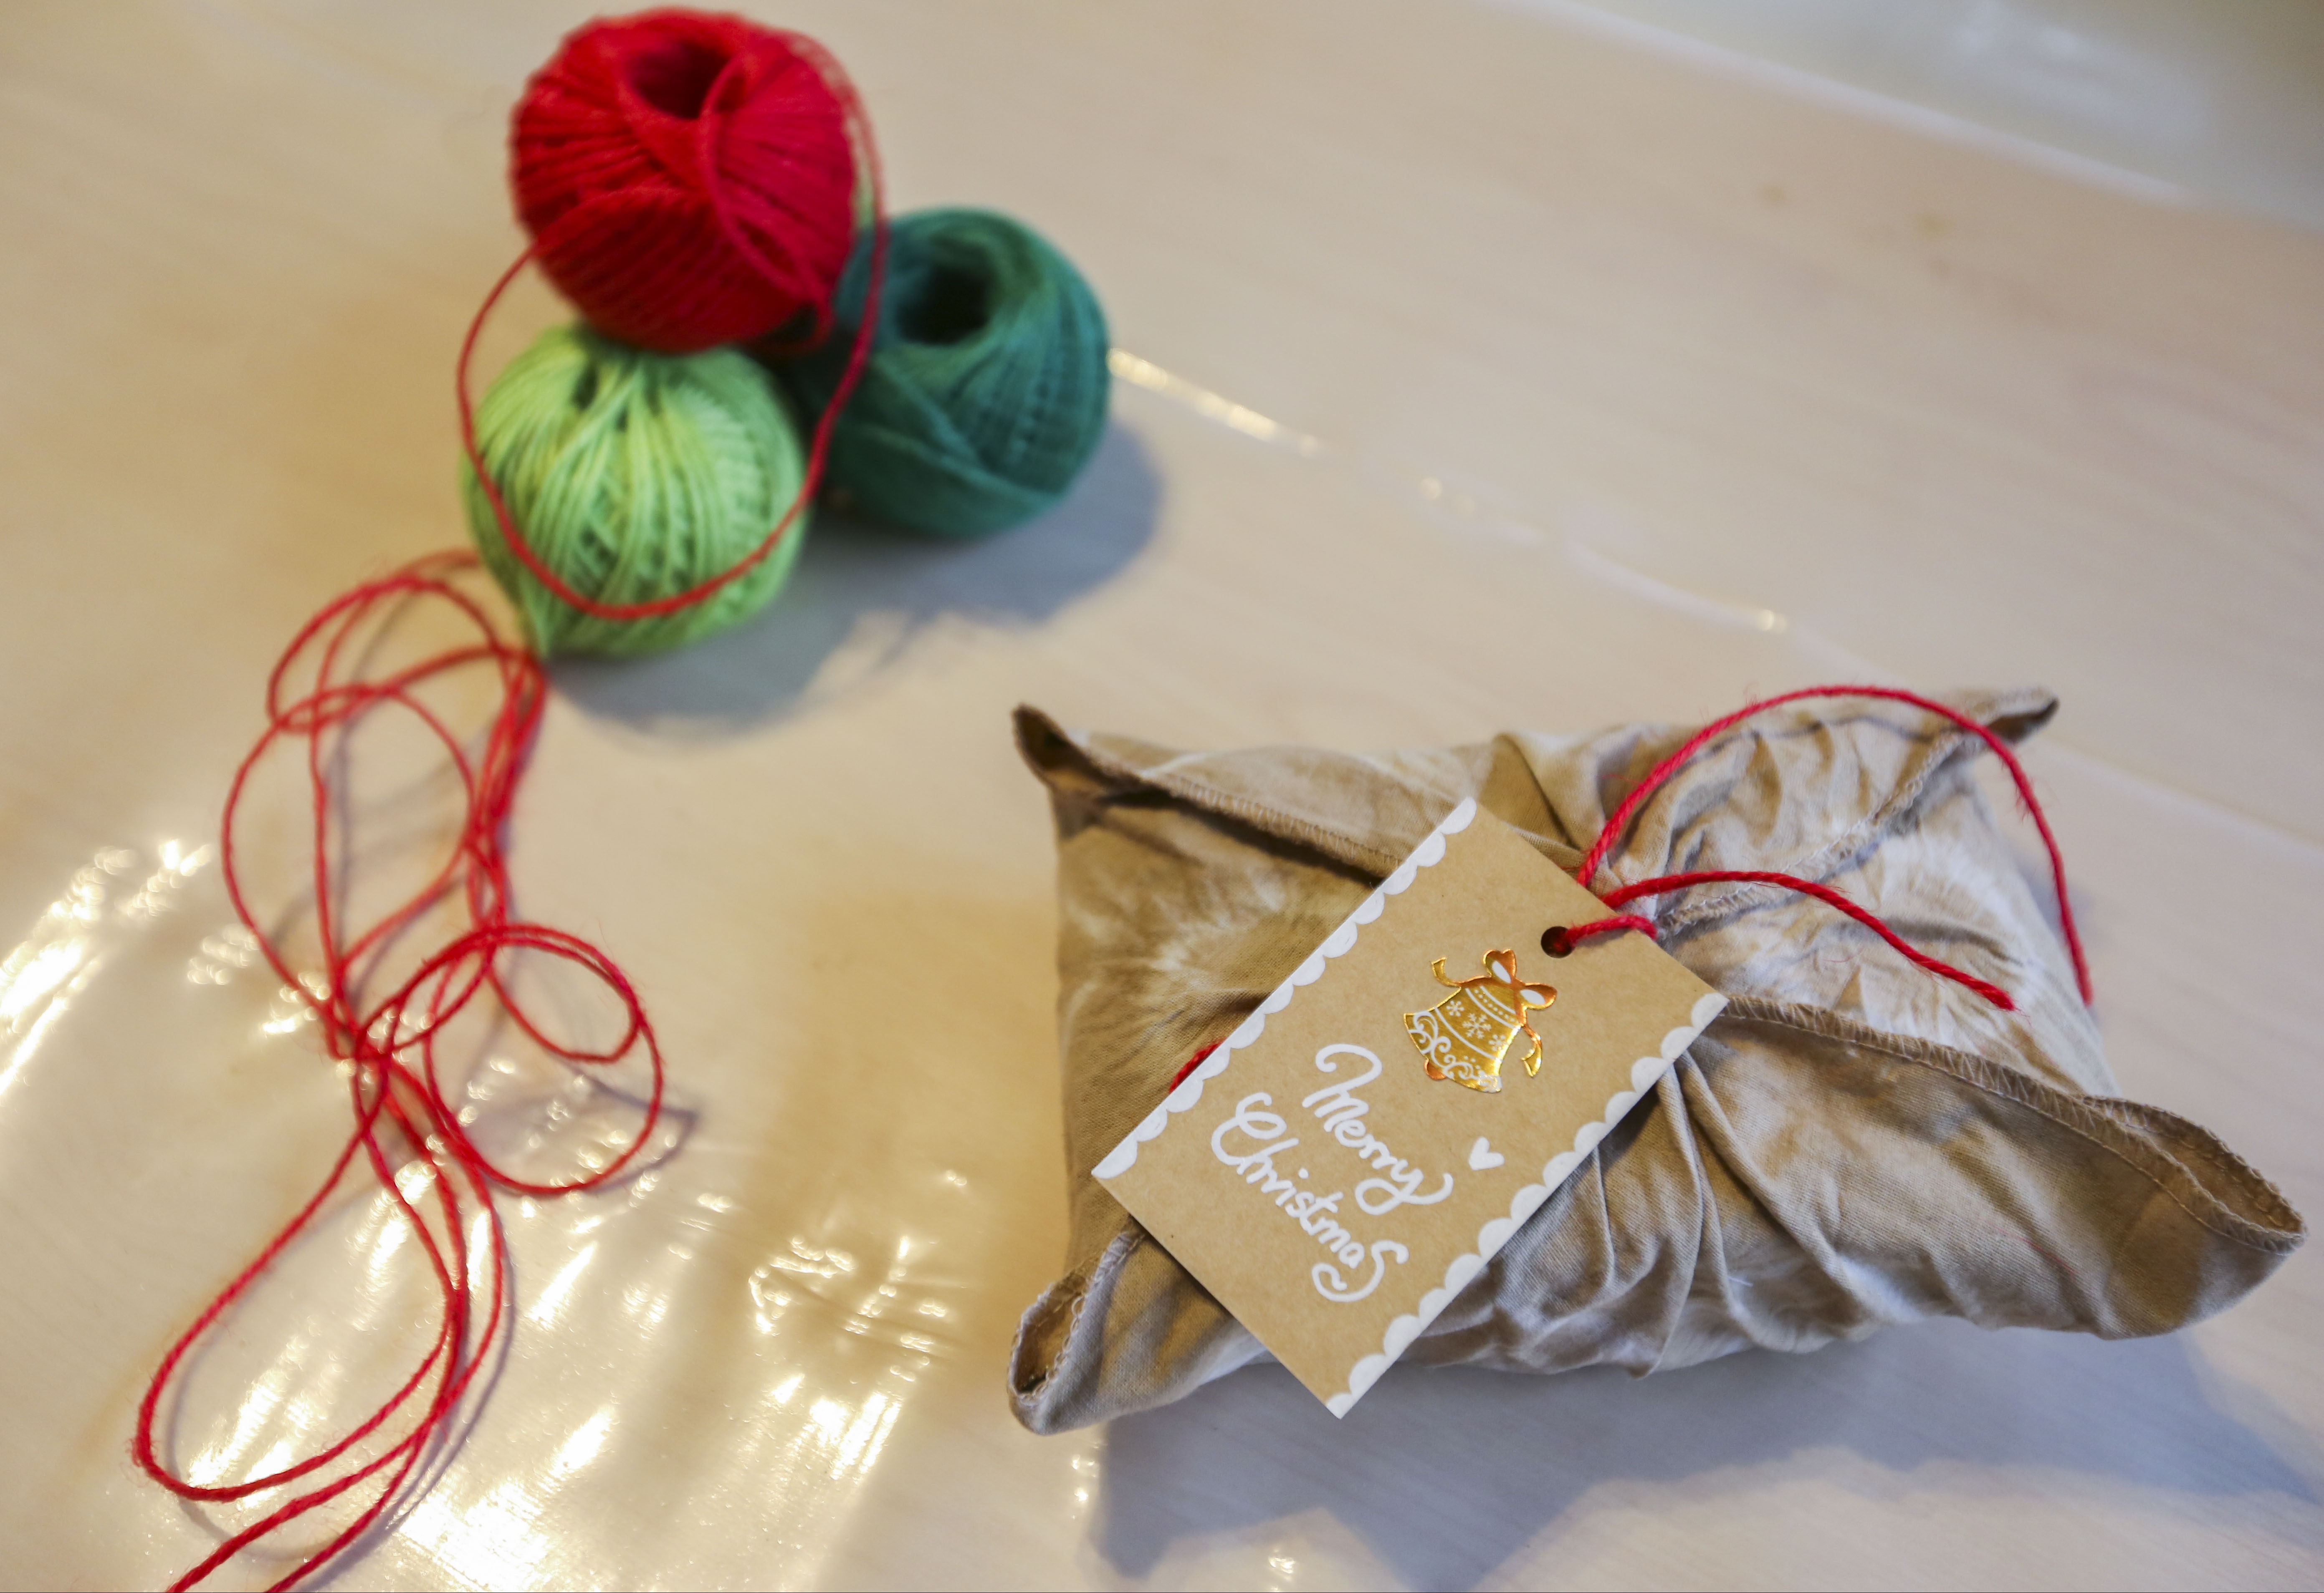 Christmas gifts are wrapped in cloth dyed from coffee grounds. Photo: Xiaomei Chen